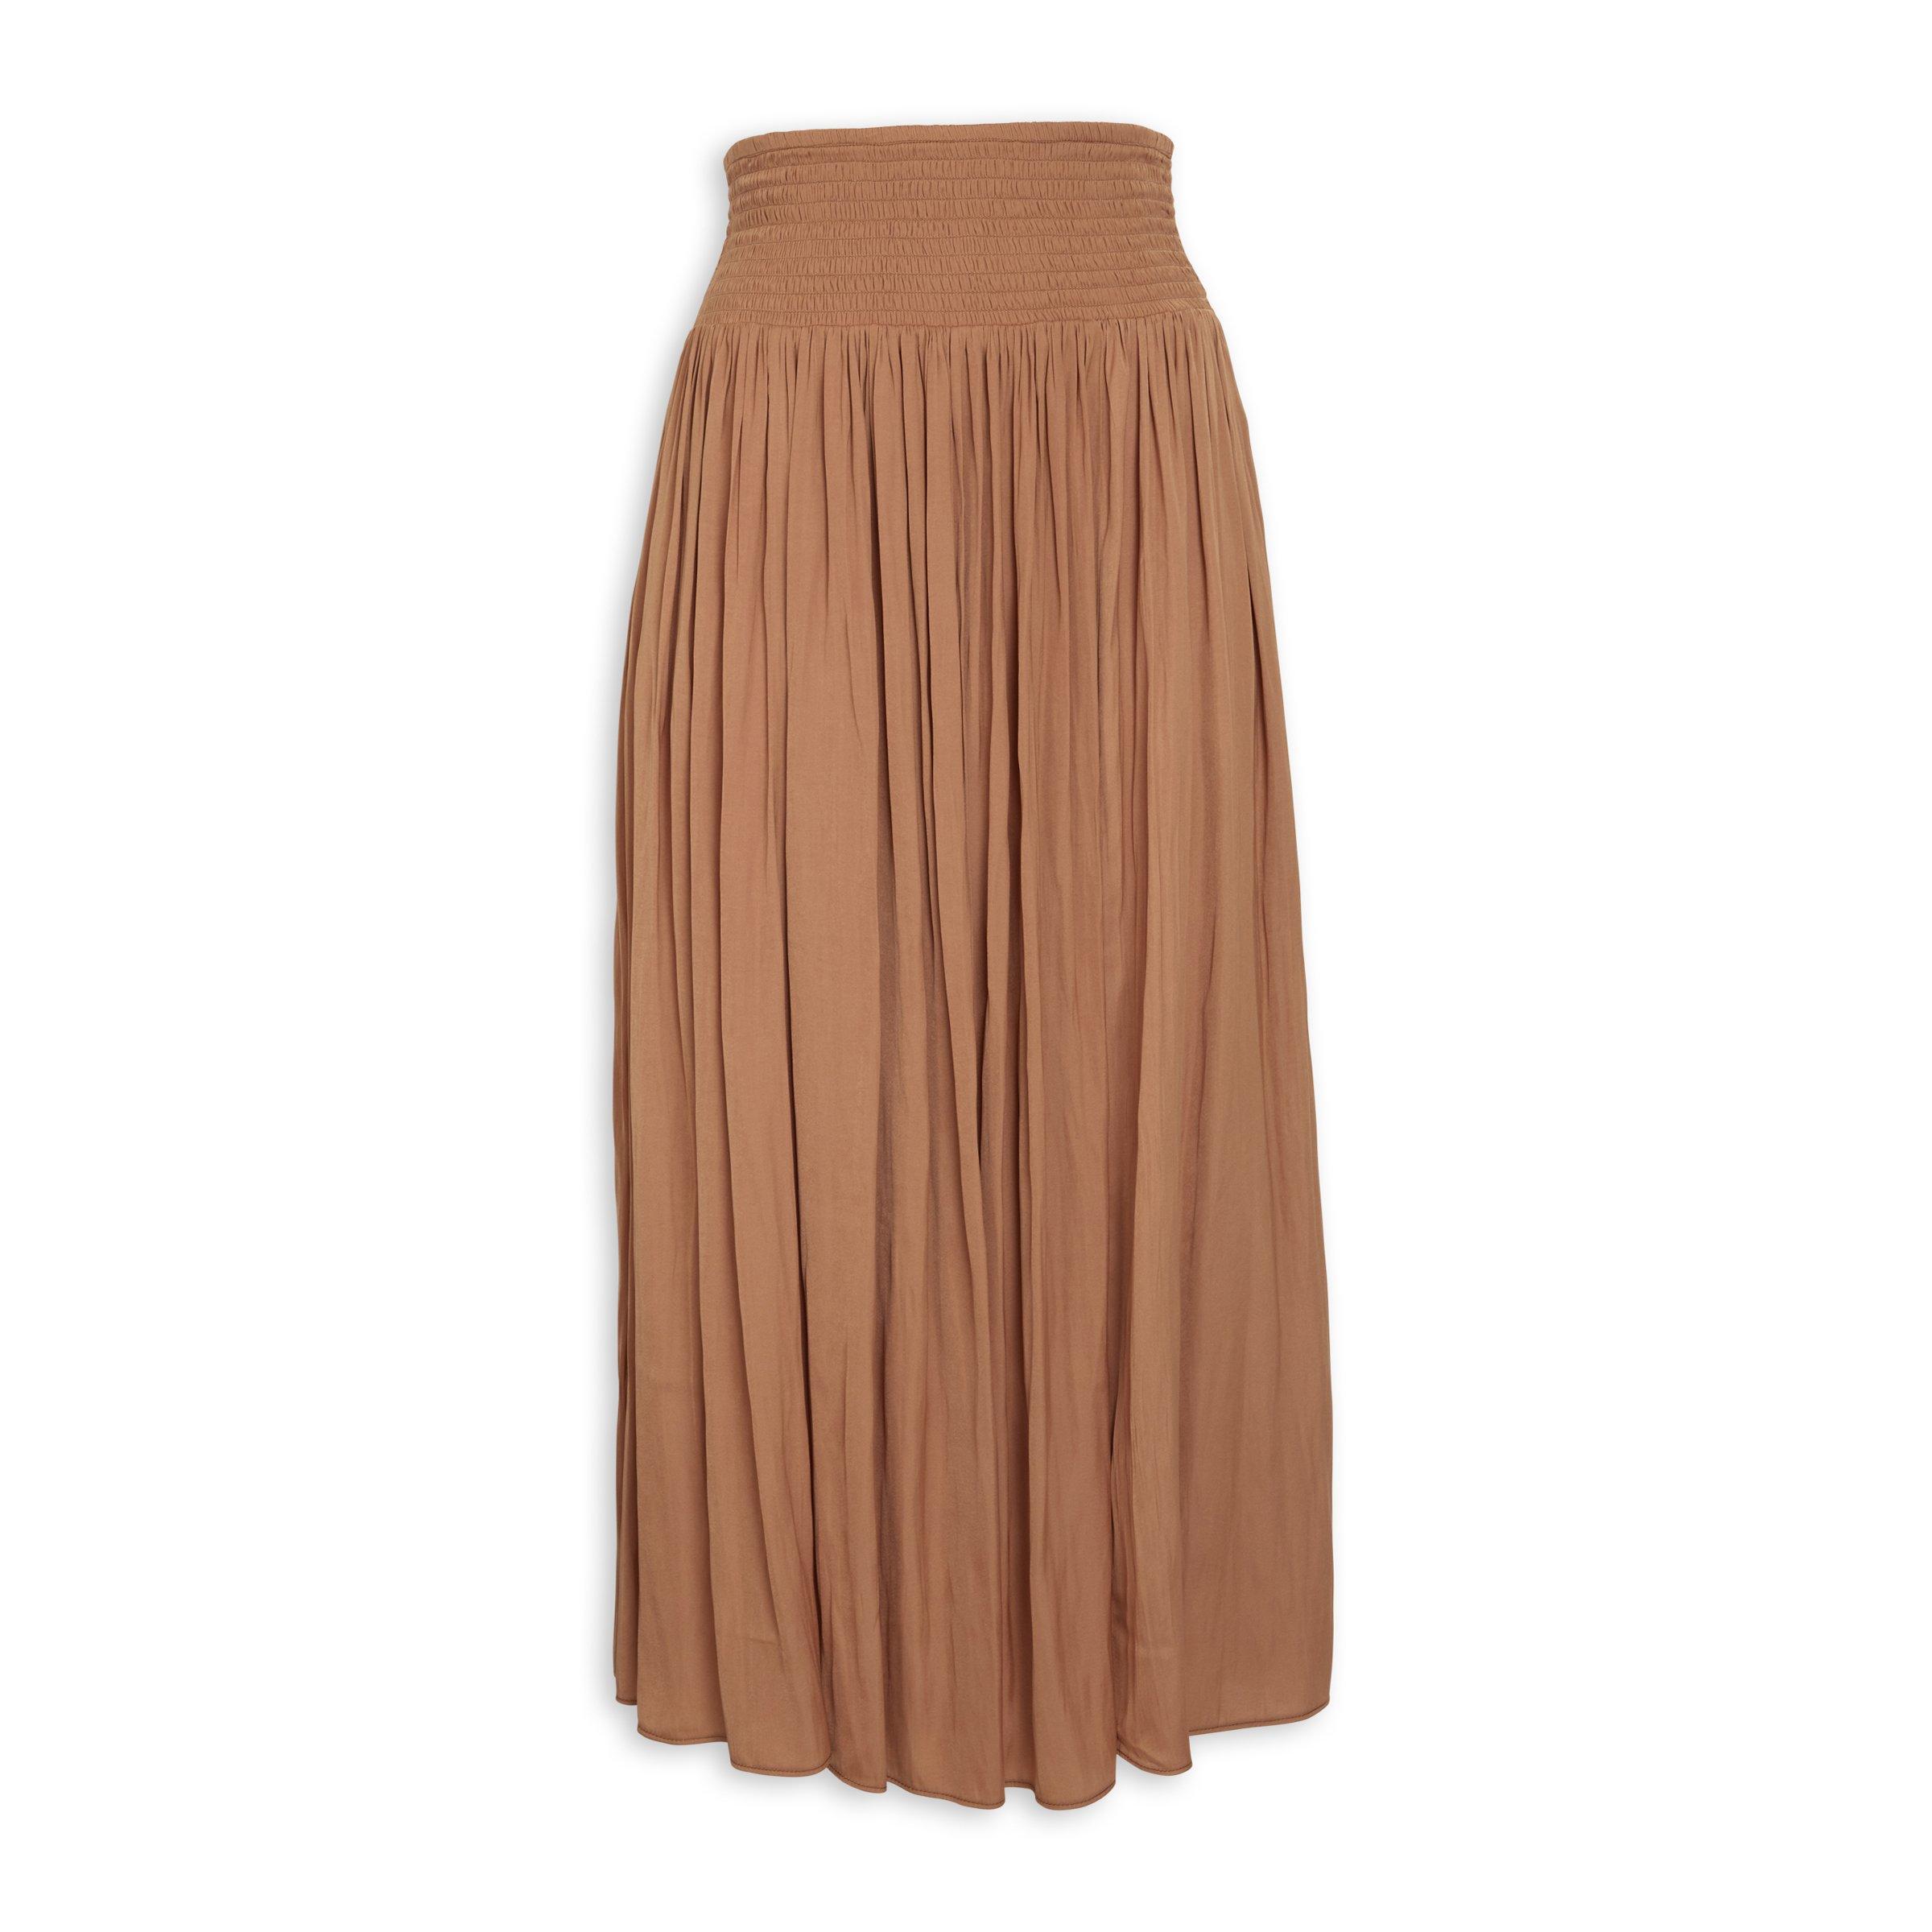 Apricot Pleated Skirt